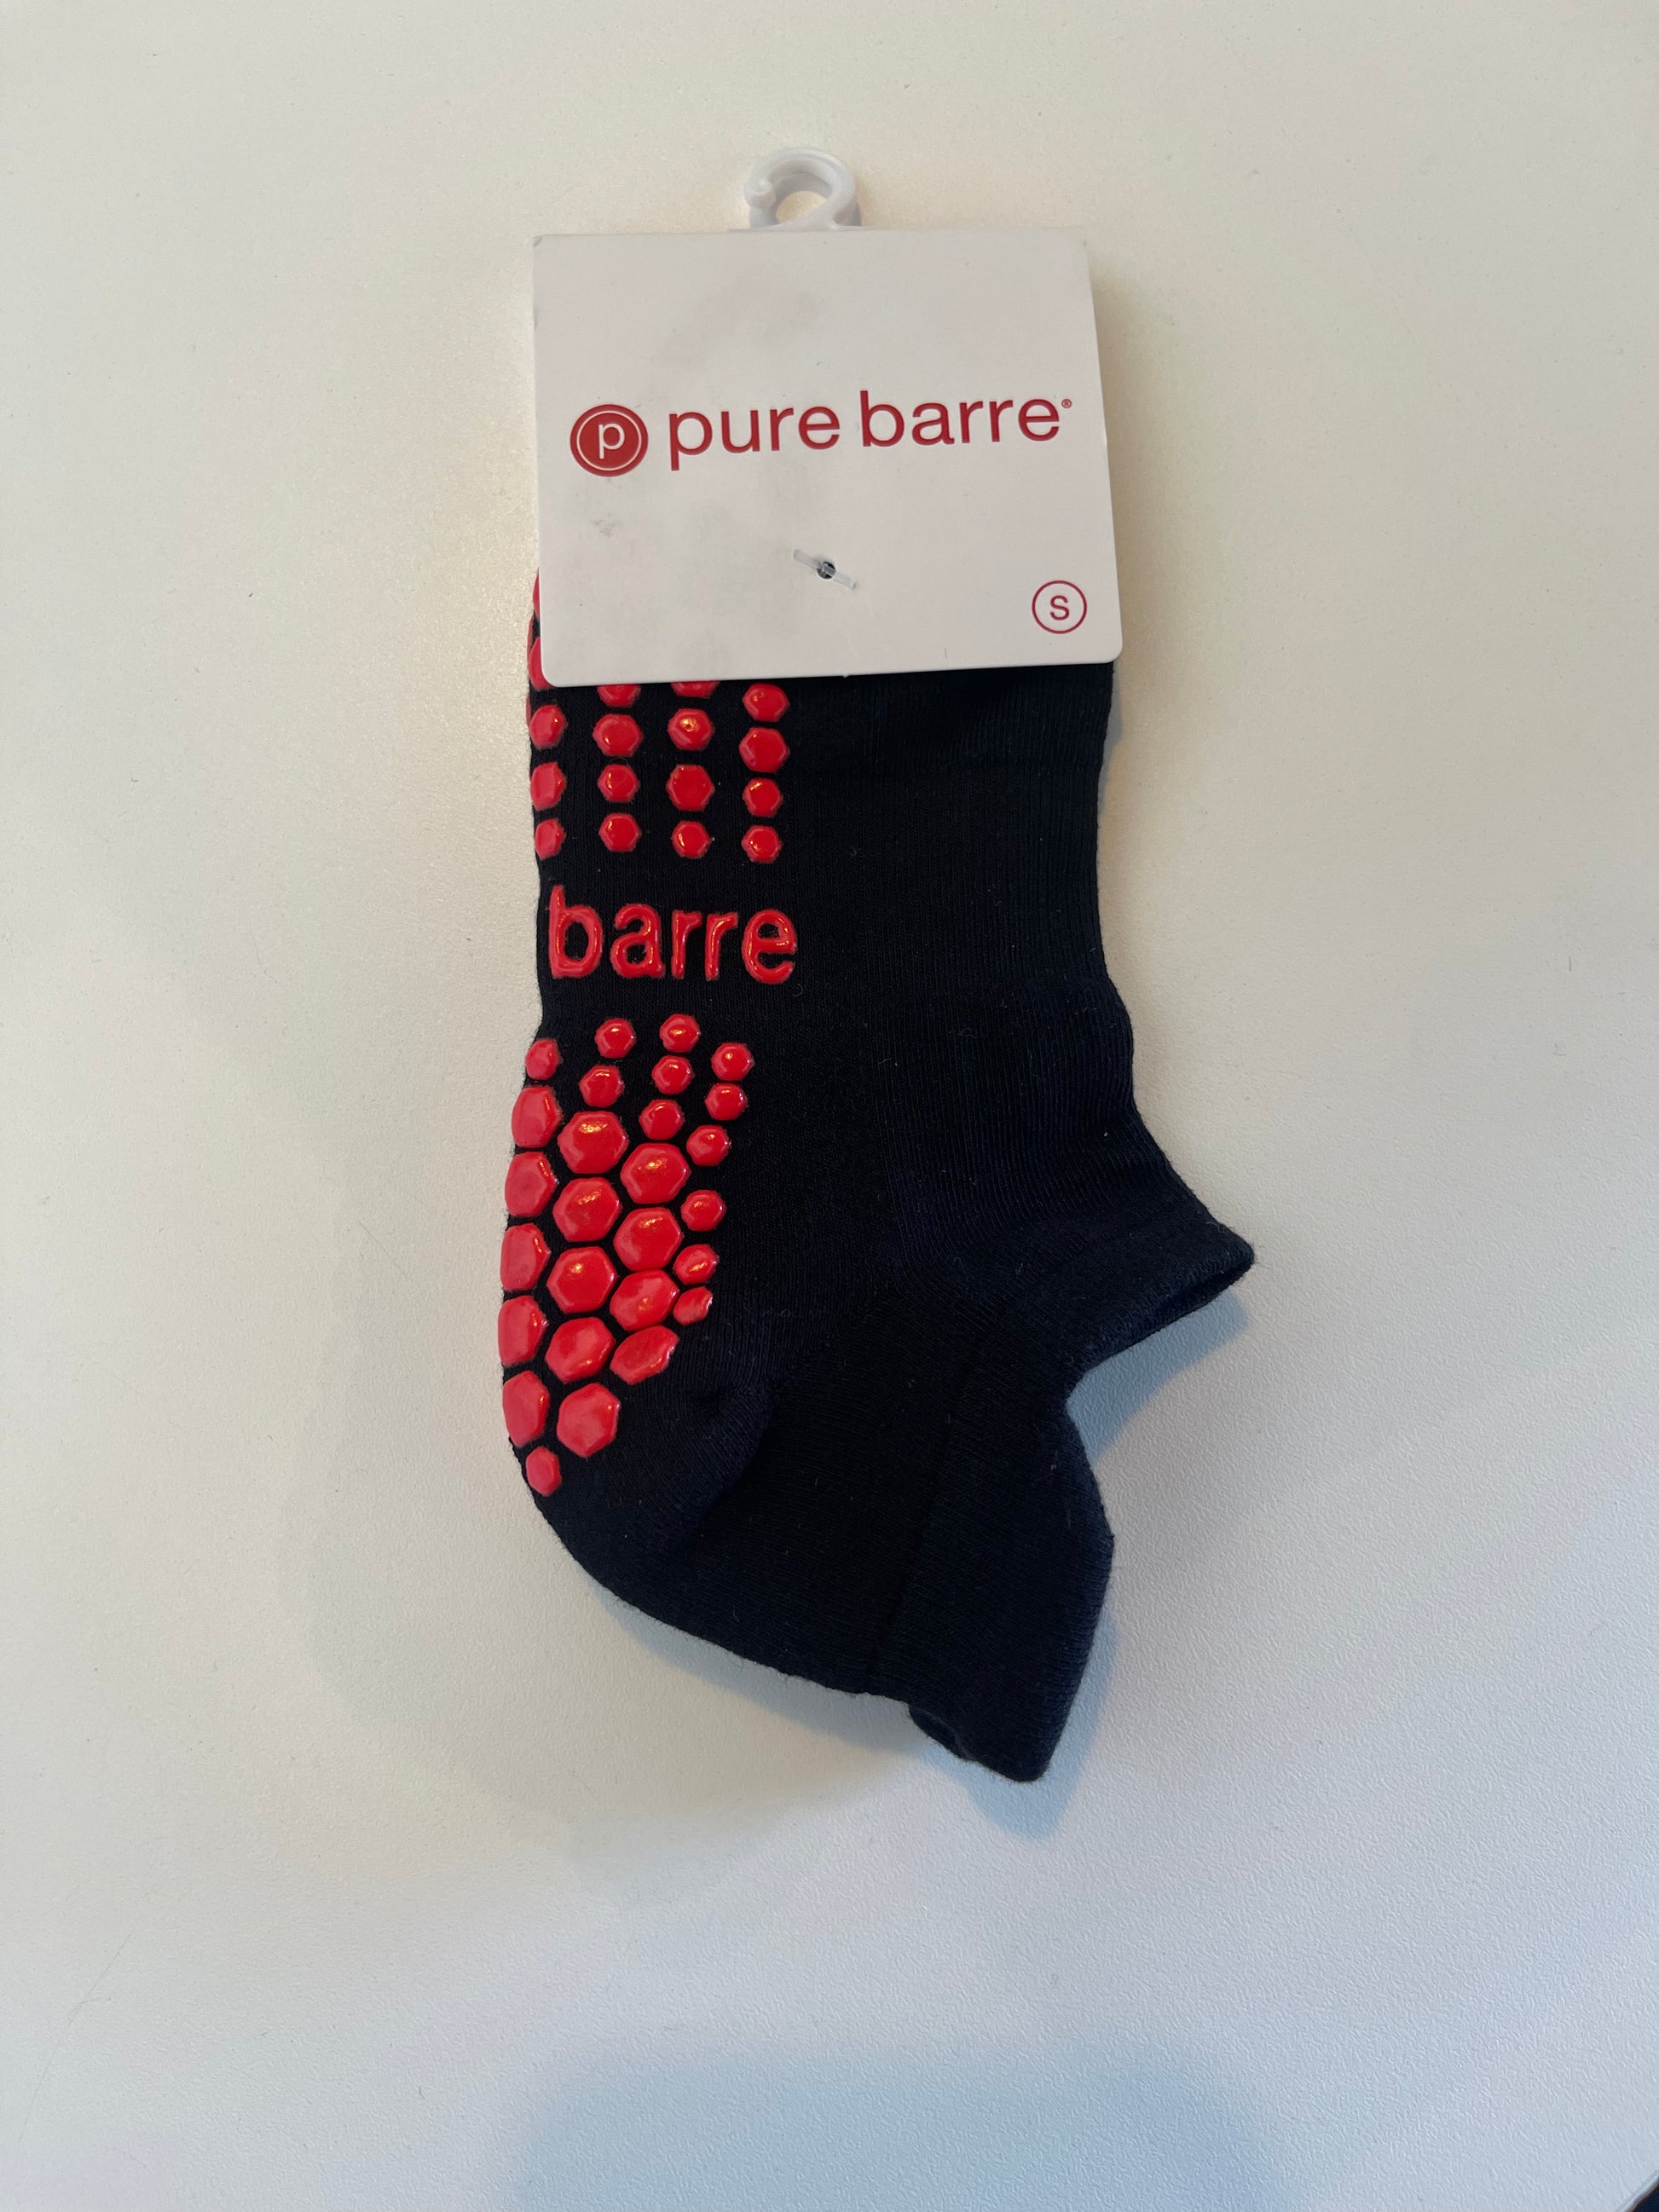 Pure Barre - Treat your feet 🛍💘 NEW Spring socks are in!! #purebarresocks  #